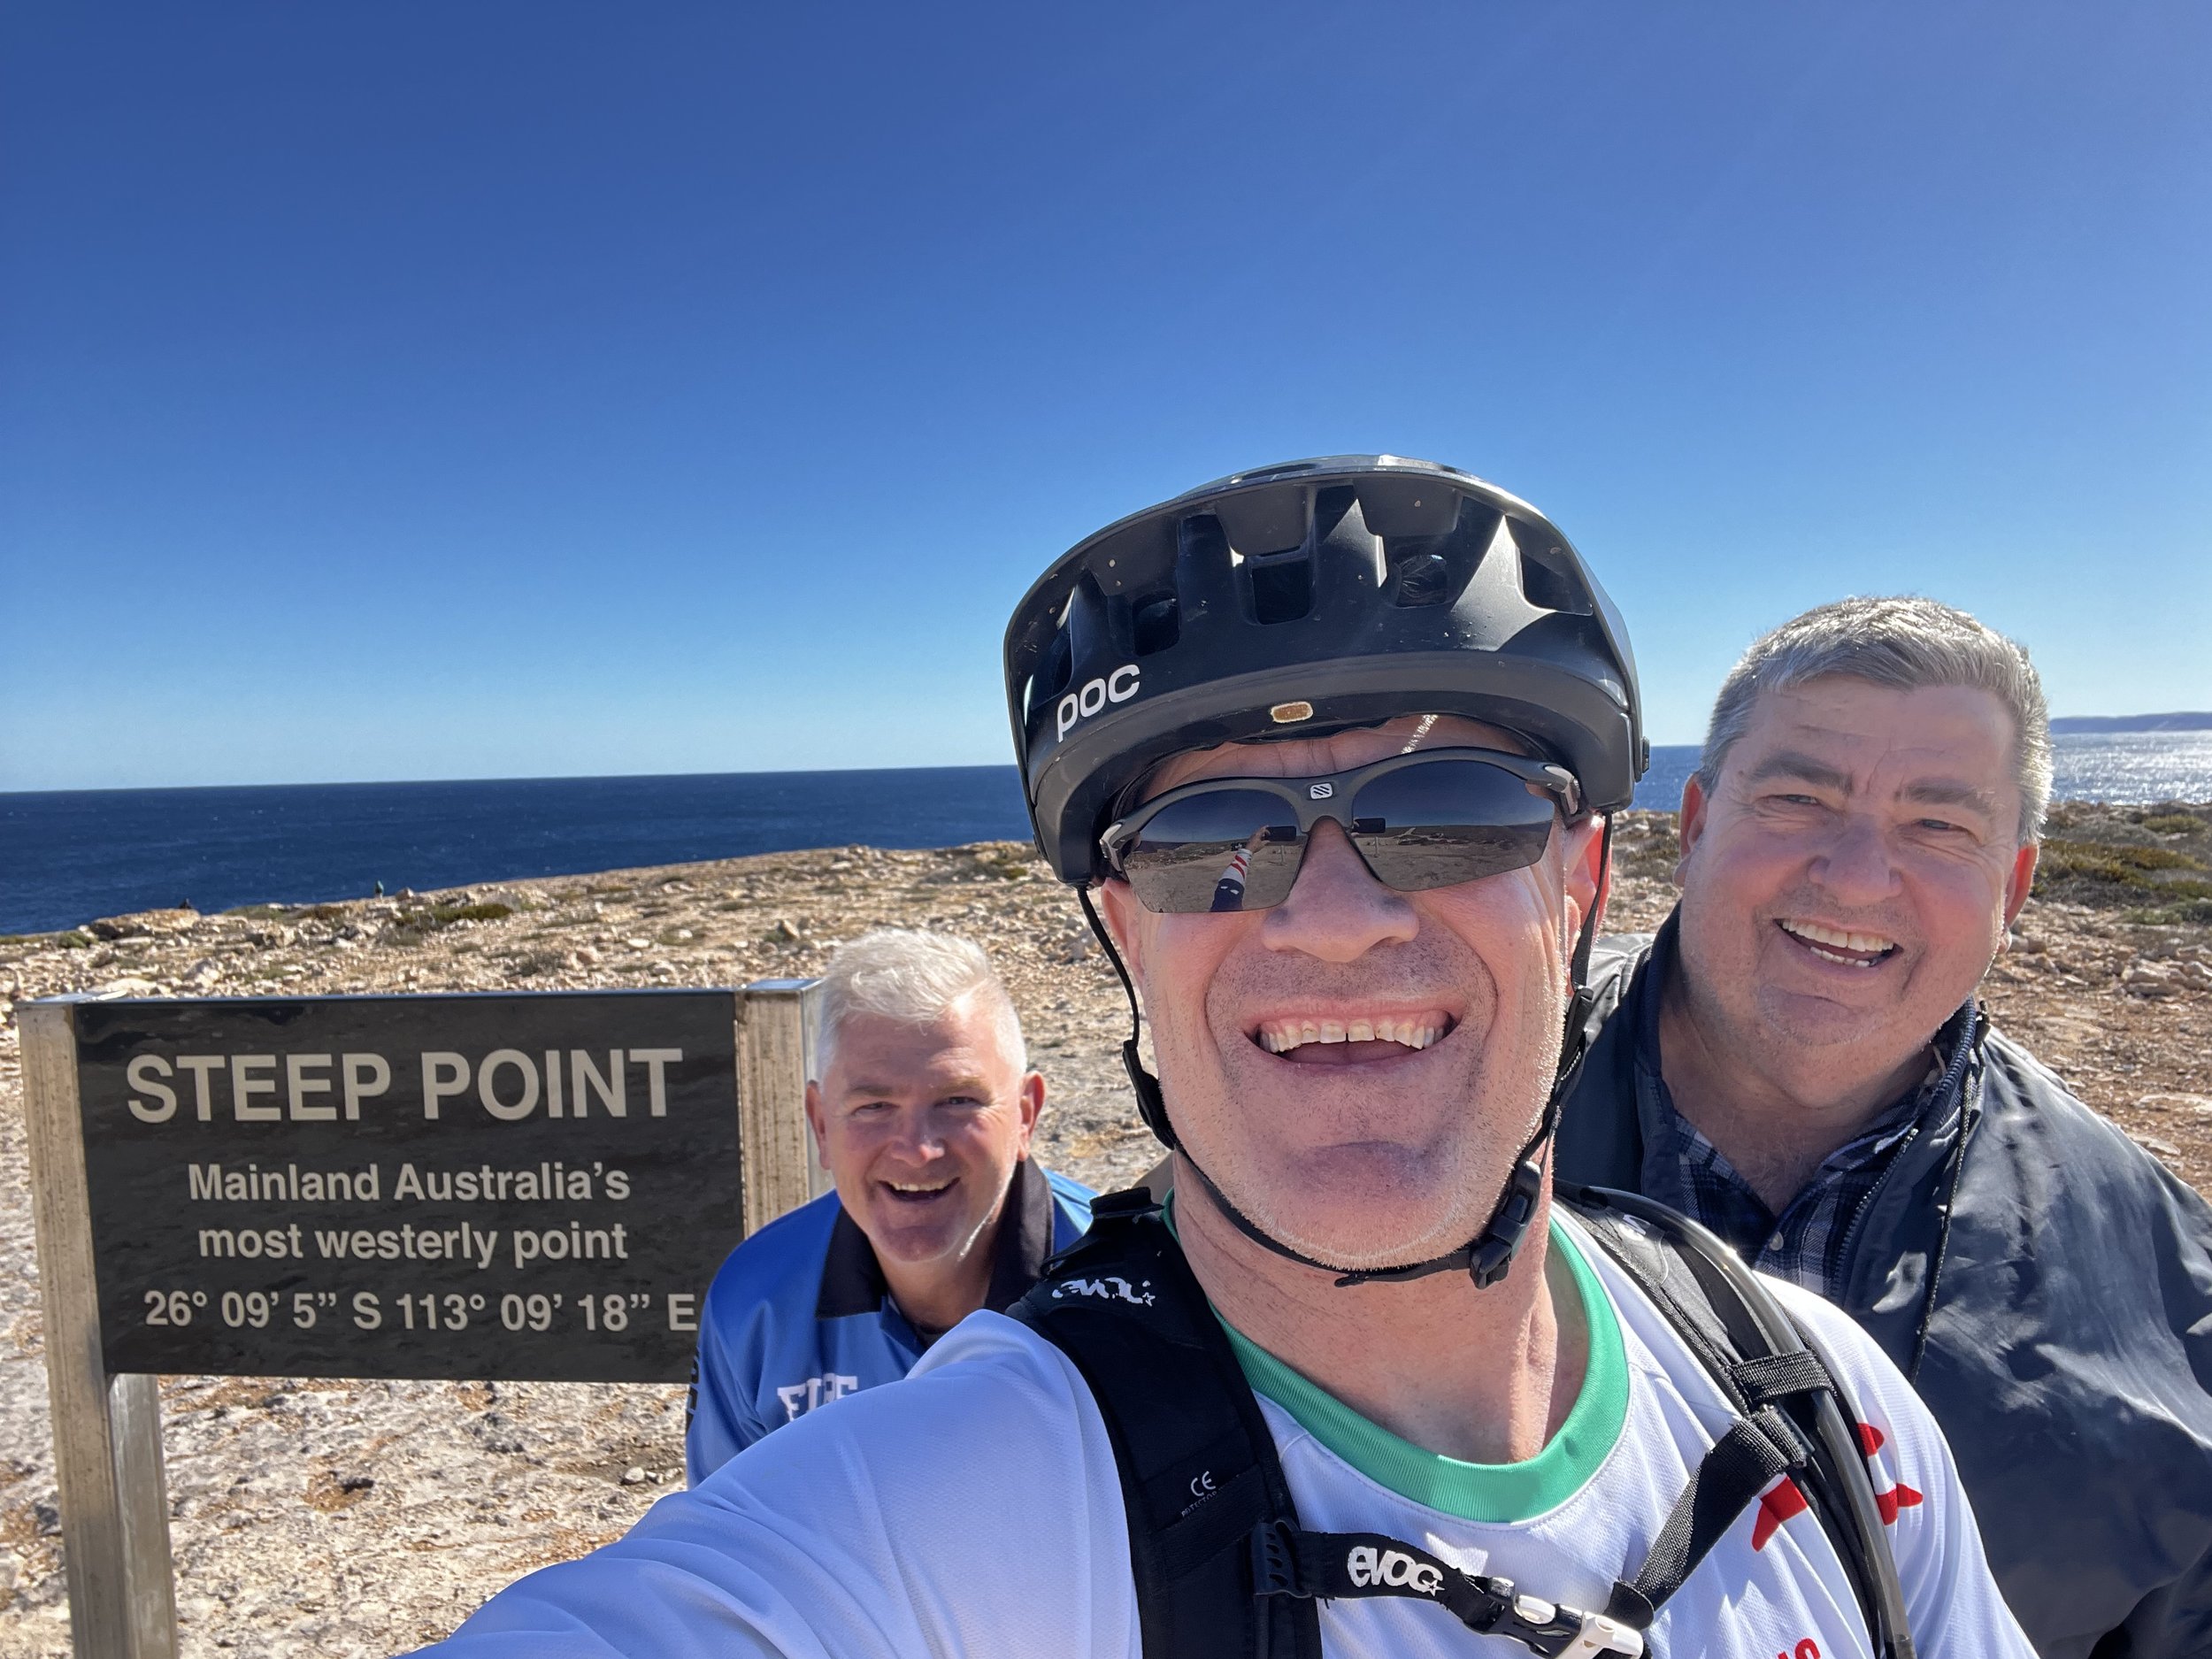 crew at steep point on day 1.JPG